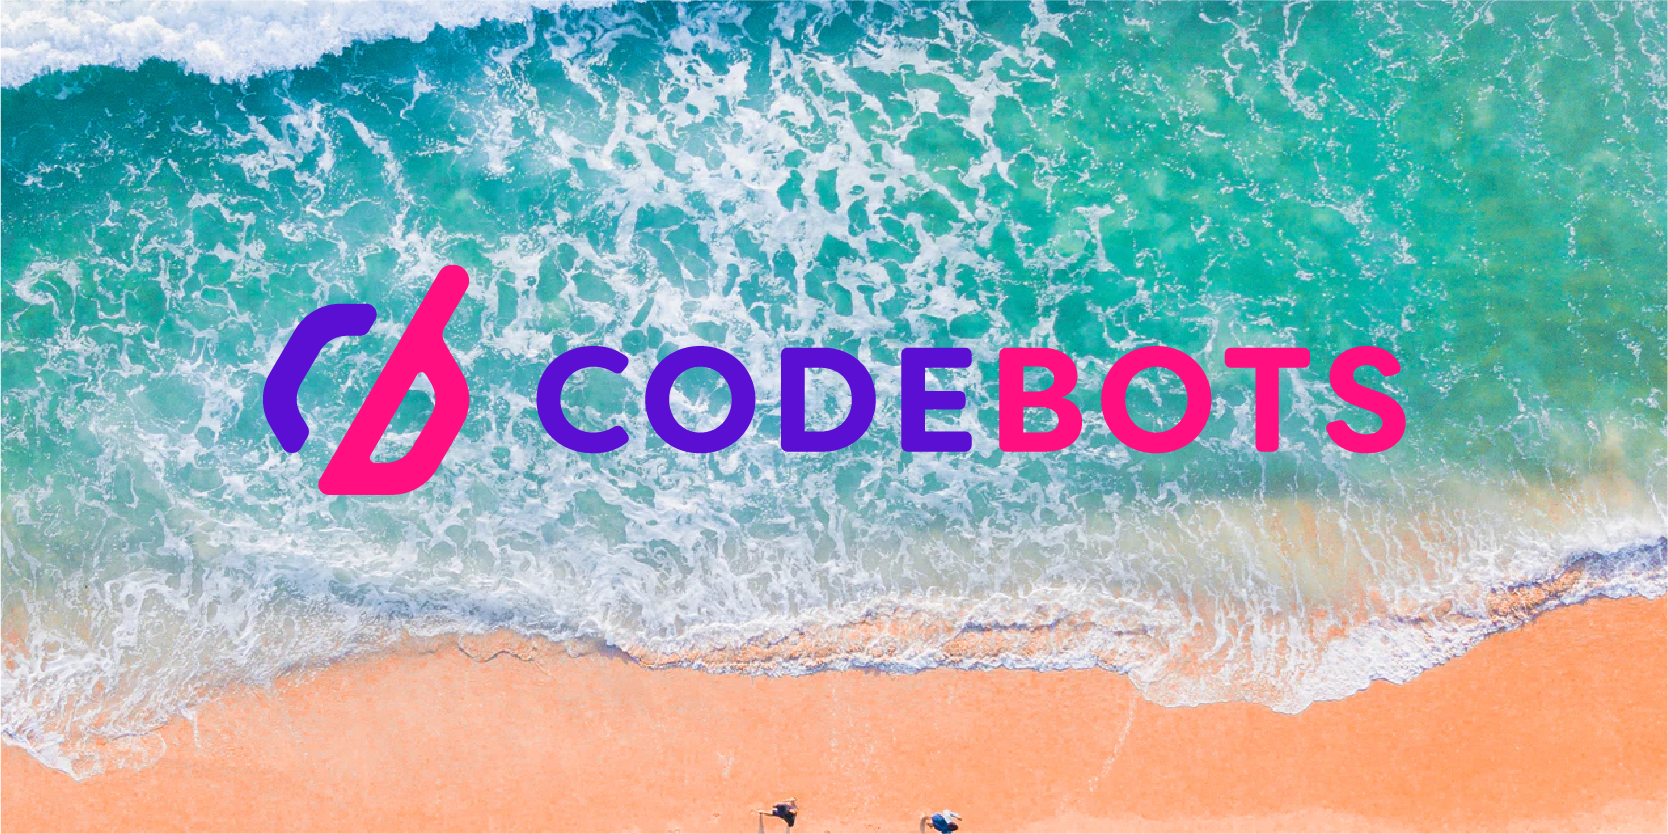 Codebots picture logo